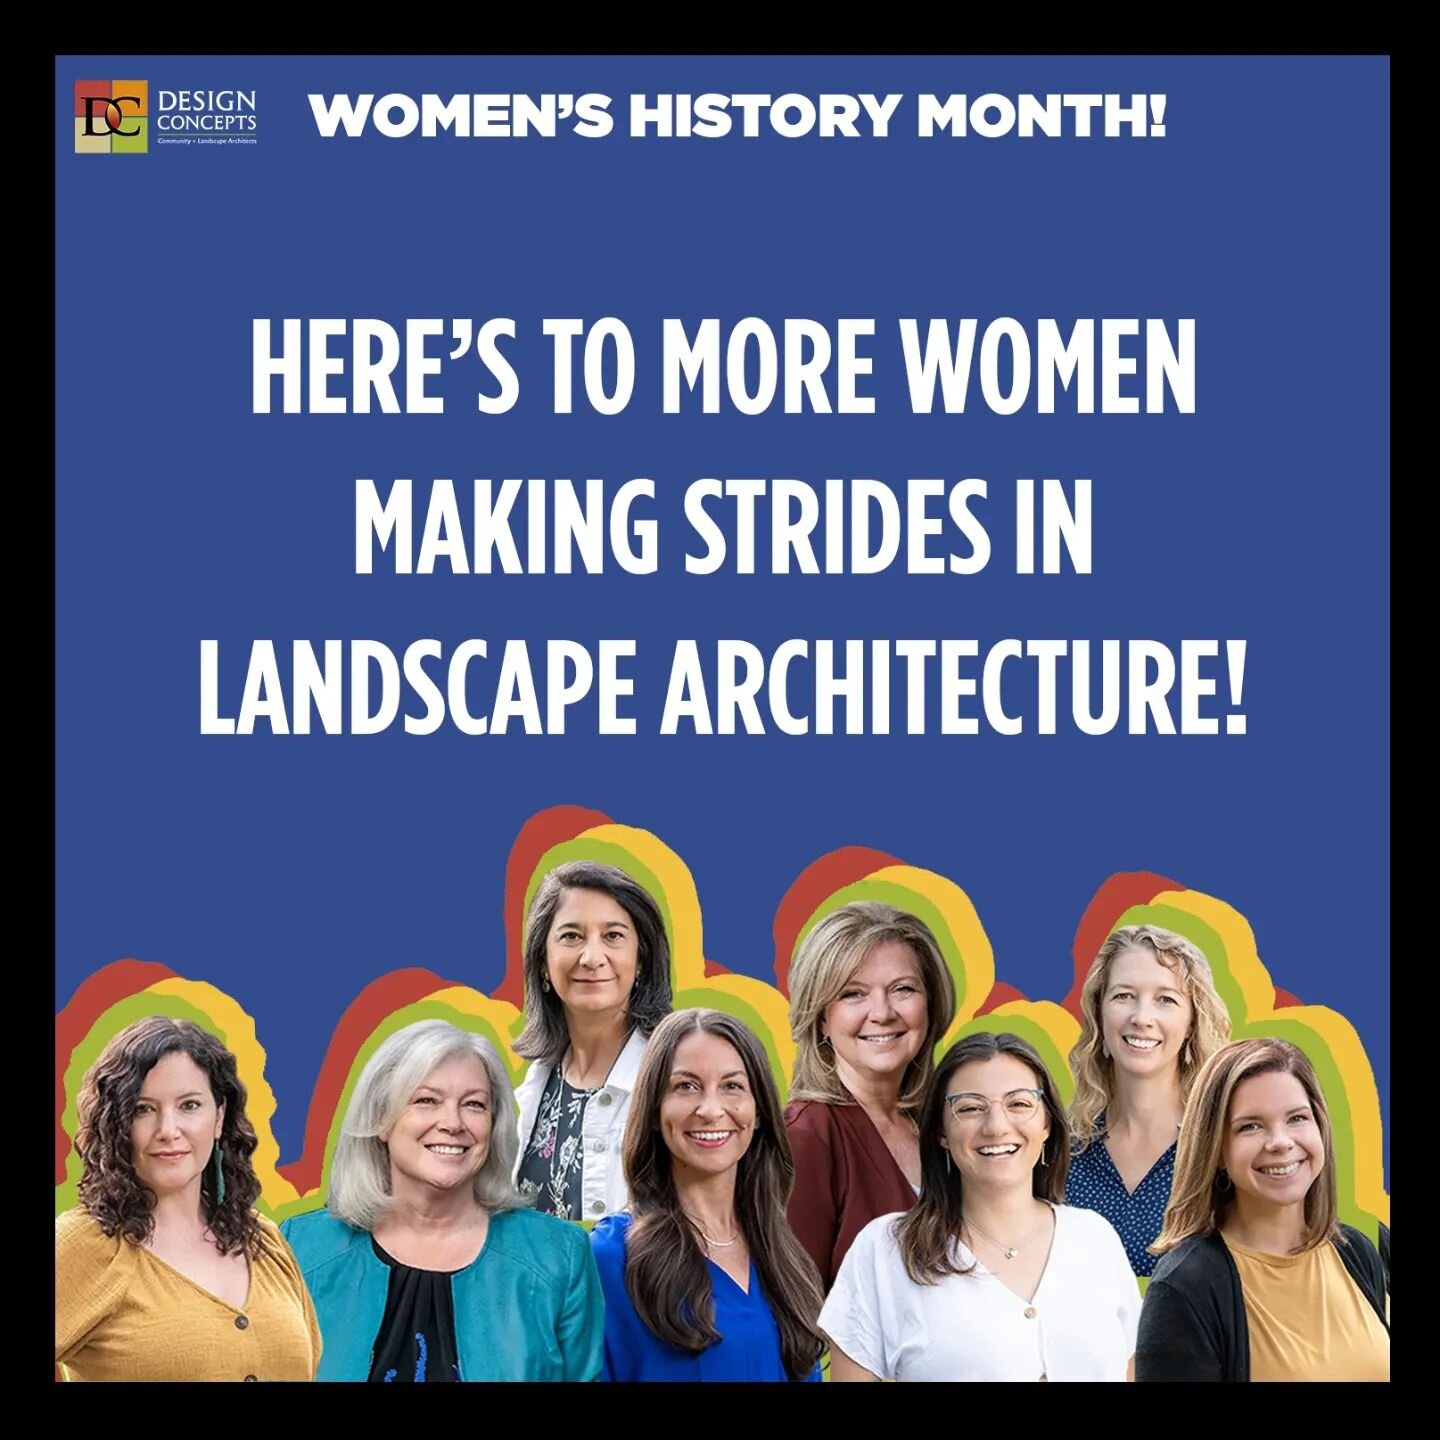 As a woman-owned landscape architecture firm we strive to create a supportive environment that empowers women to grow, create, and feel heard. We honor the women who have paved the way in design and will continue to amplify women&rsquo;s voices in la